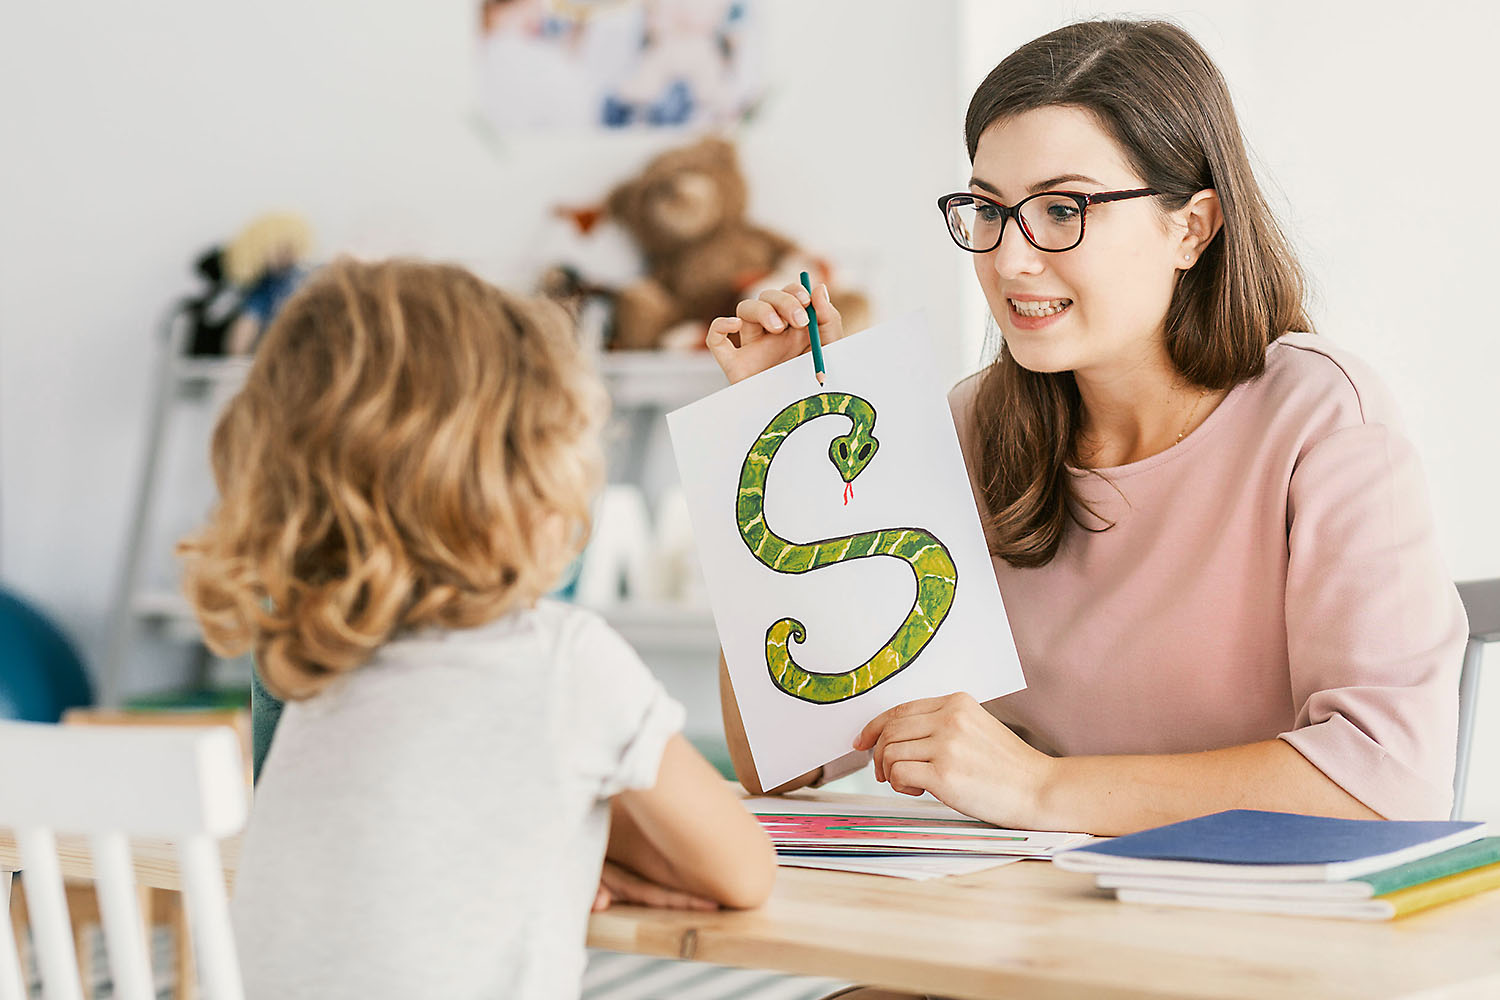 Speech therapist holding sign with letter "S" for child.